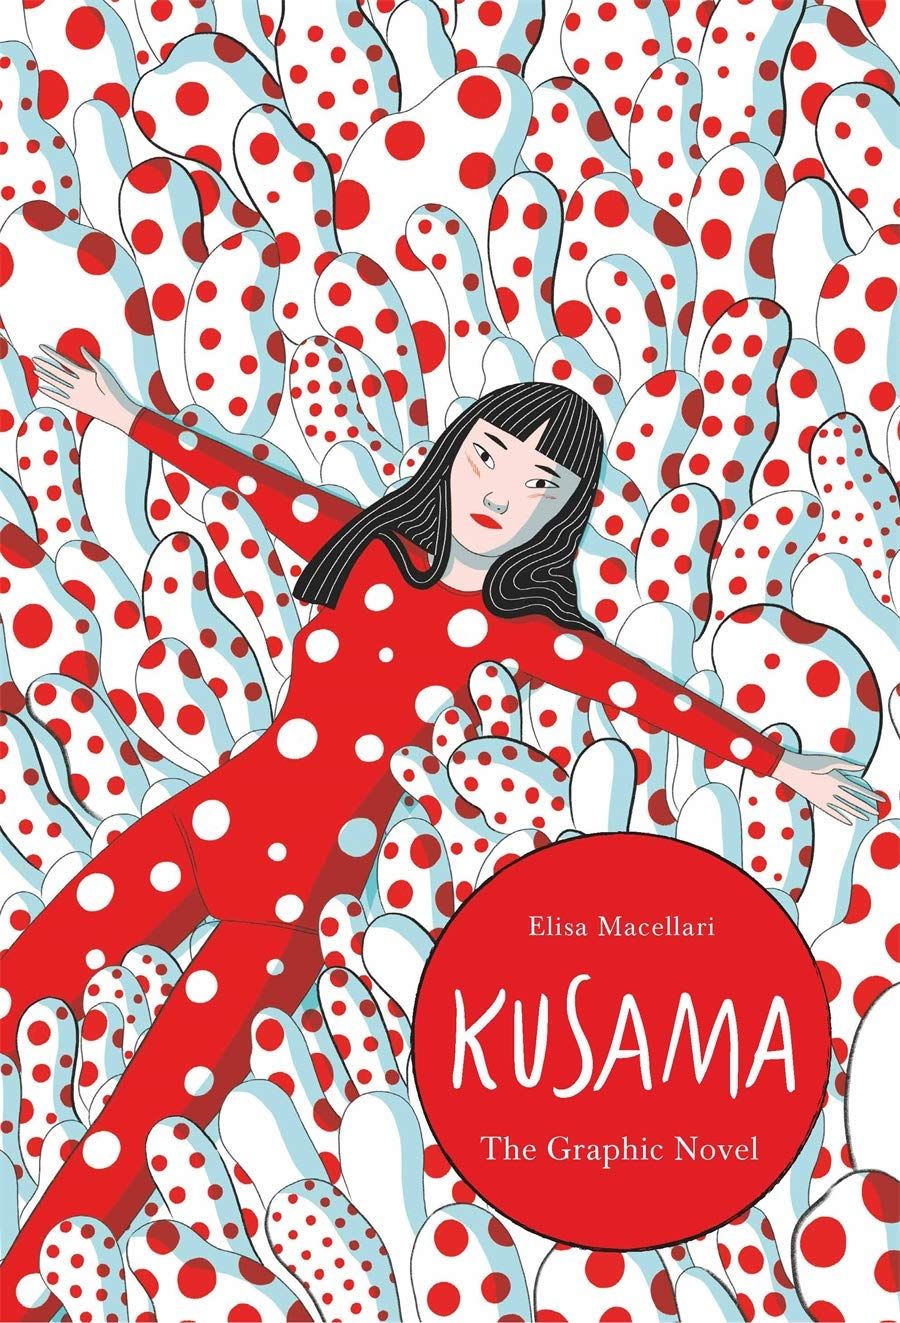 A colorful new comic-book biography of Yayoi Kusama follows her trials and triumphs: